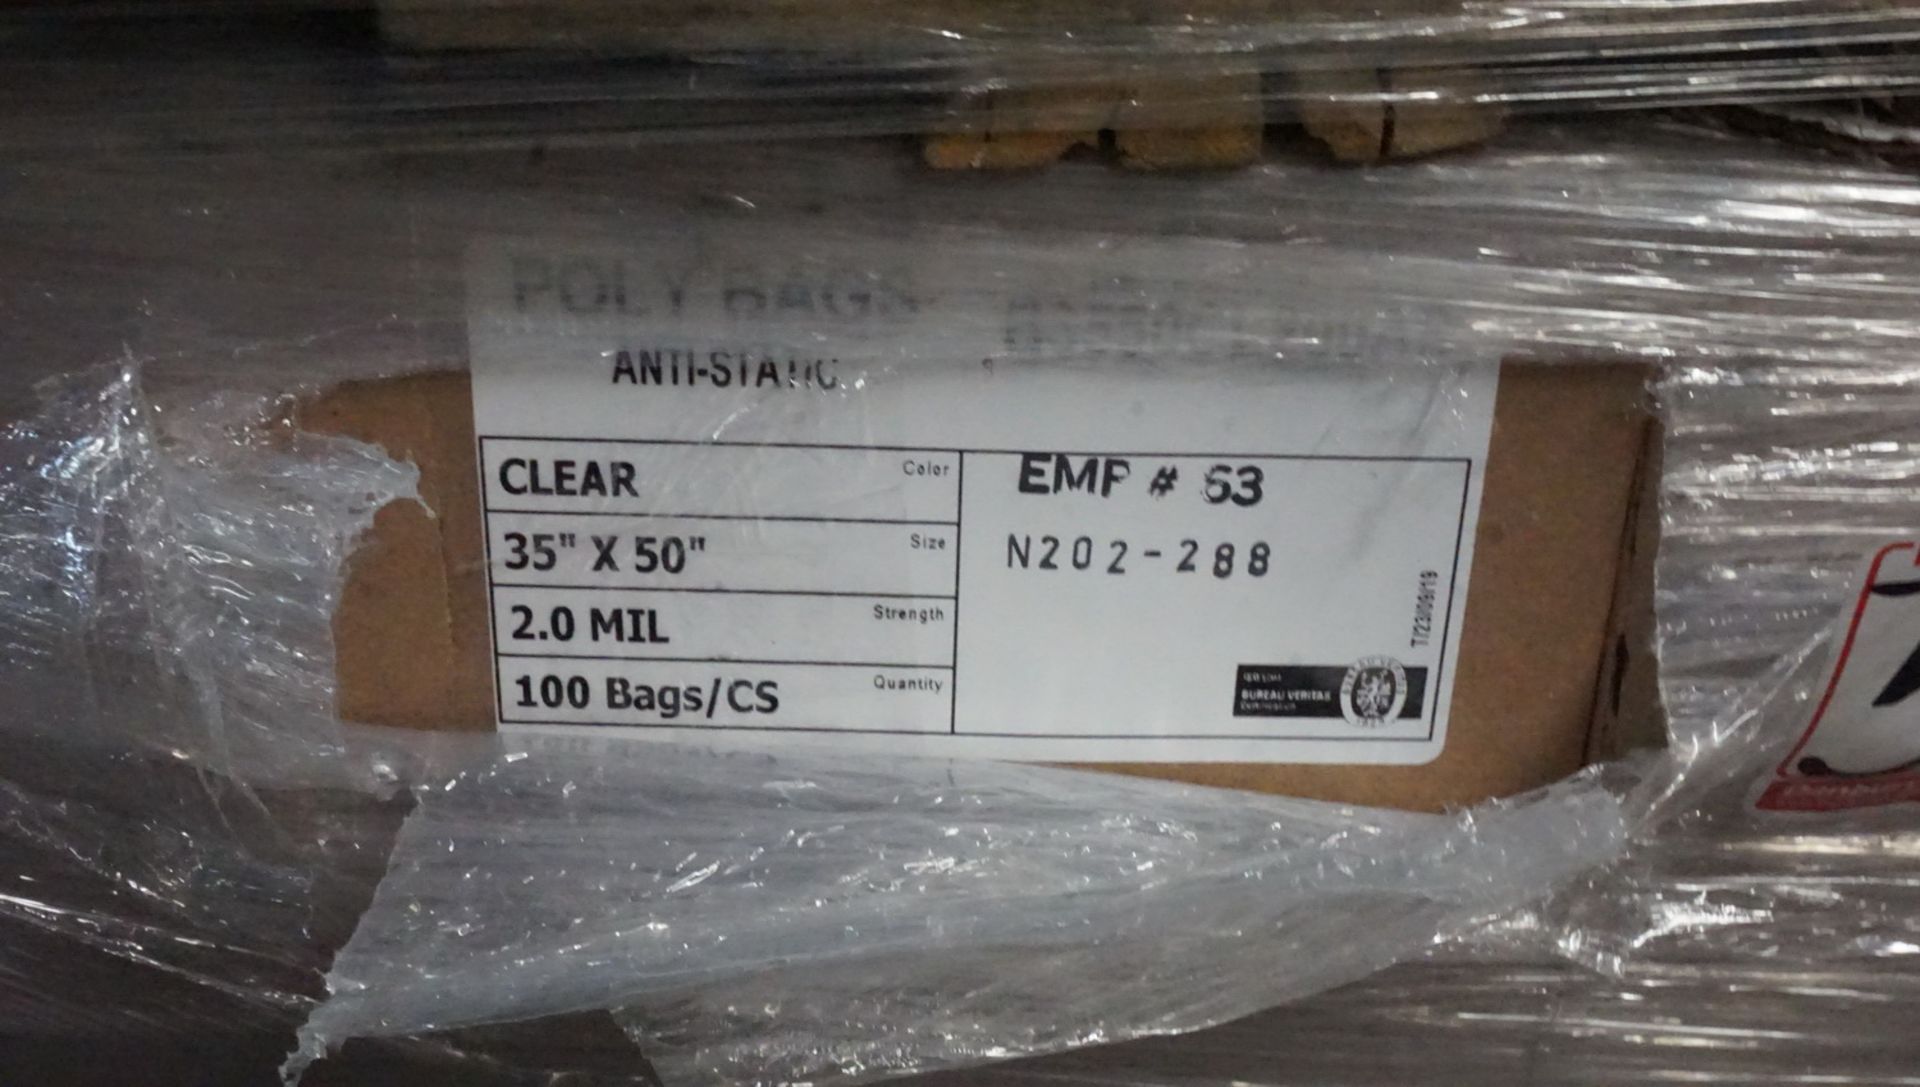 BOXES - CLEAR 35 X 50" 2MIL POLY BAGS (100 BAGS / BOX) - Image 2 of 2